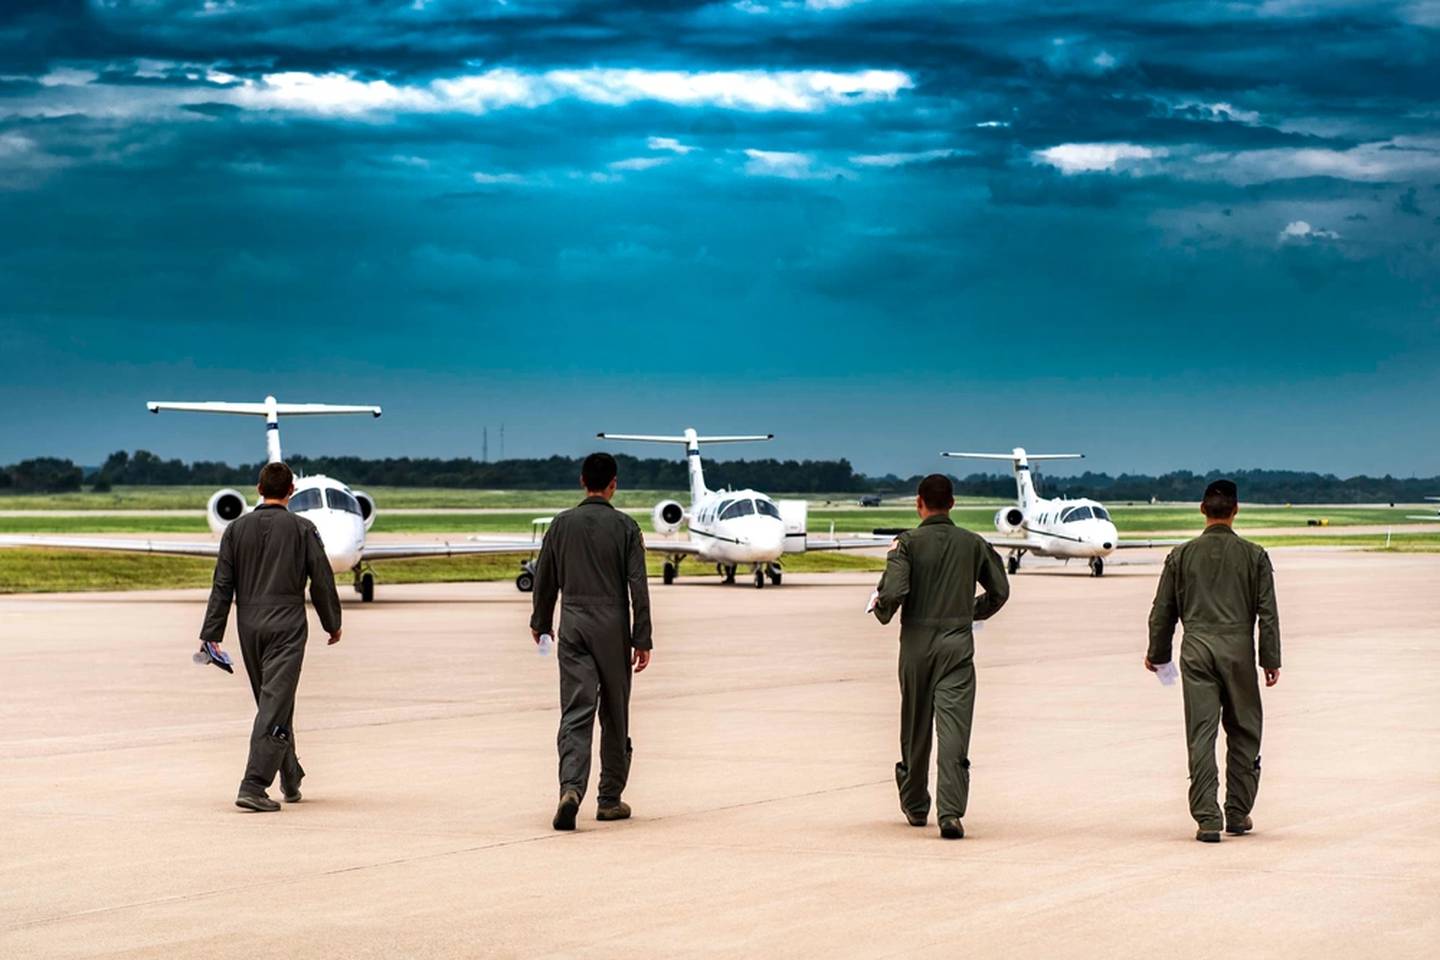 Members of the 3rd Flying Training Squadron walk to their T-1 Jayhawk aircraft at Northwest Arkansas Regional Airport, Aug. 26, 2018. Continuation training allows instructor pilots to maintain their proficiency and qualifications. (Tech. Sgt. Erik Cardenas/Air Force)